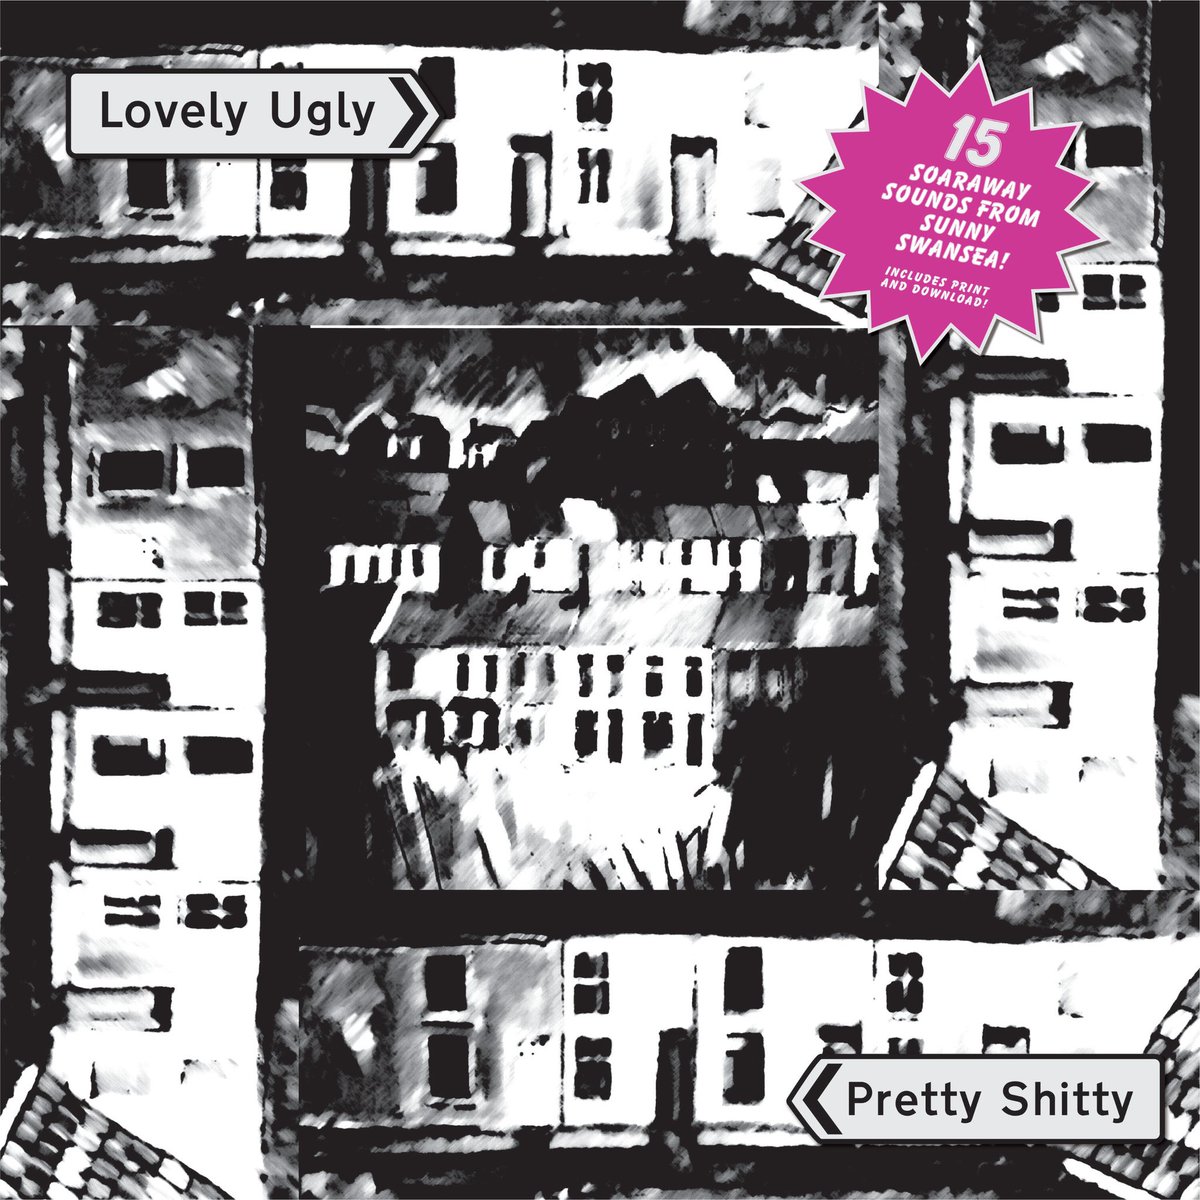 Great to be included on this new compilation of Swansea bands. Ugly Lovely will be released on black and white splatter vinyl via @RichardREPEAT on 31st May. And it available to pre-order today. repeatfanzine.bandcamp.com/album/lovely-u…